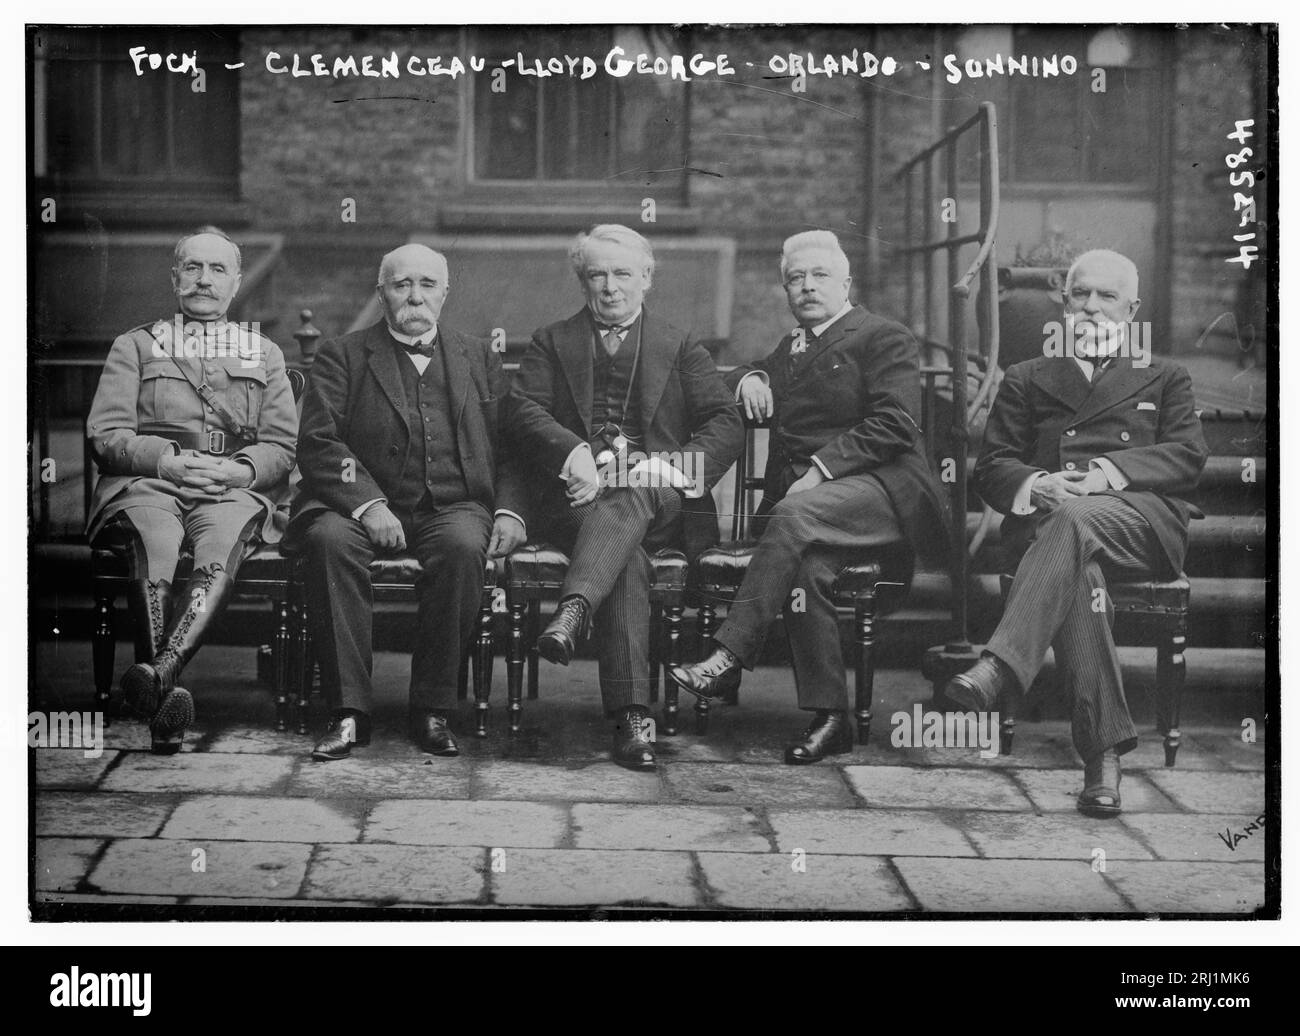 Foch, Clemenceau, Lloyd George, Orlando, Sonnino.  French General Ferdinand Foch, French Prime Minister Georges Benjamin Clemenceau, British Prime Minister David Lloyd George, Italian Prime Minister Vittorio Emanuele Orlando and Italian Minister of Foreign Affairs Baron Sidney Costantino Sonnino.  Between ca. 1915 and ca. 1920. Stock Photo